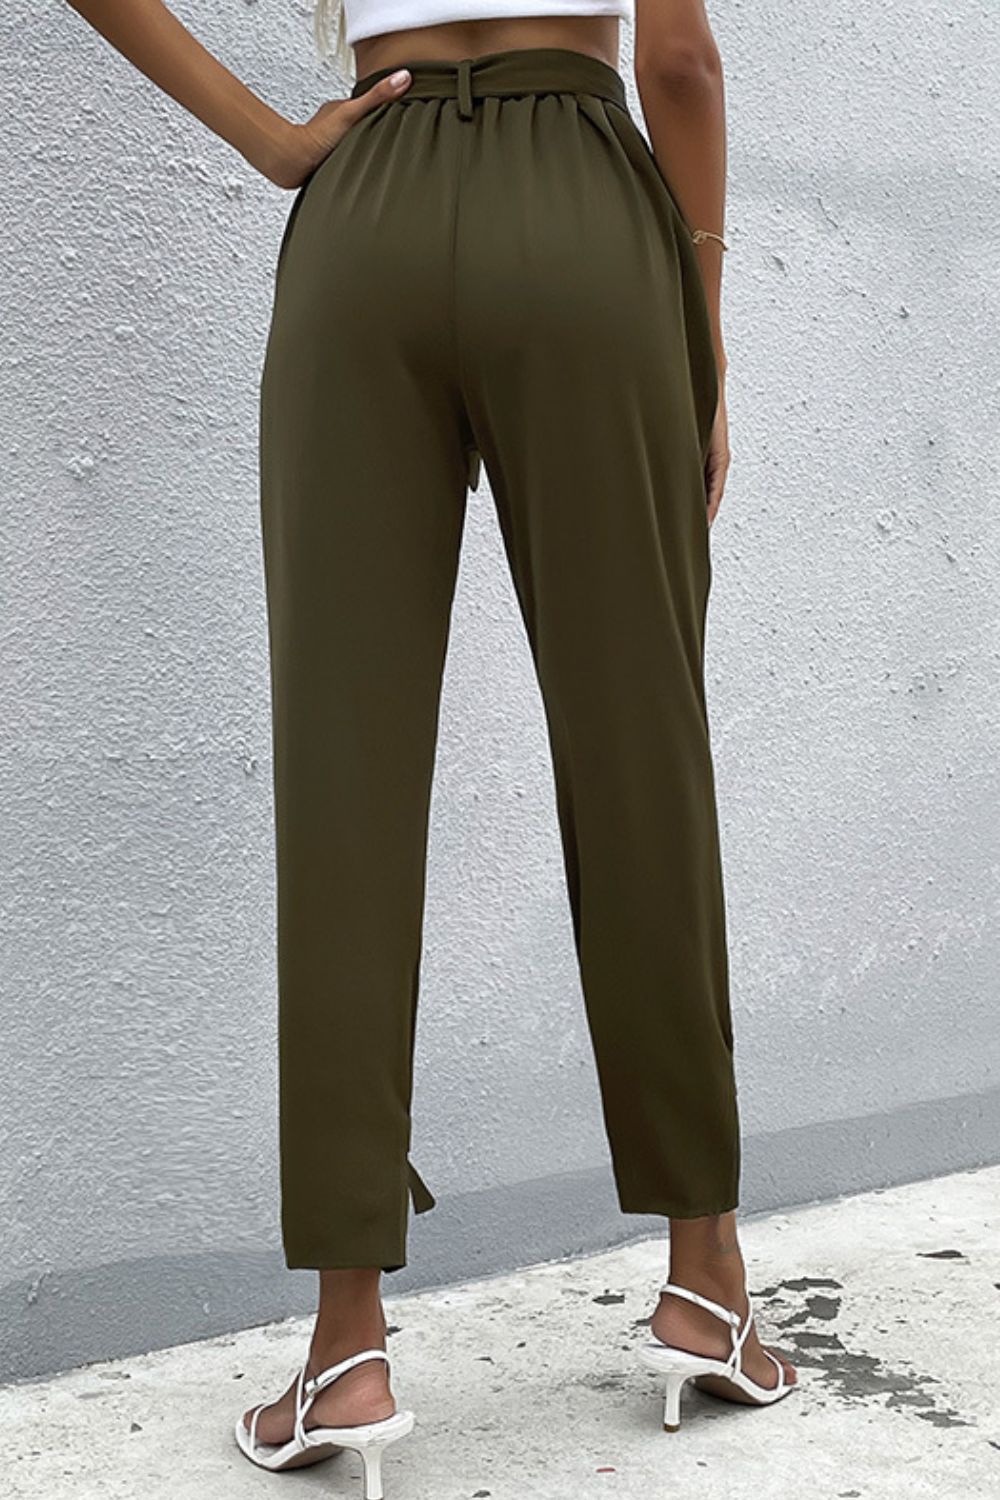 Tie Detail Belted Pants with Pockets - Shah S. Sahota